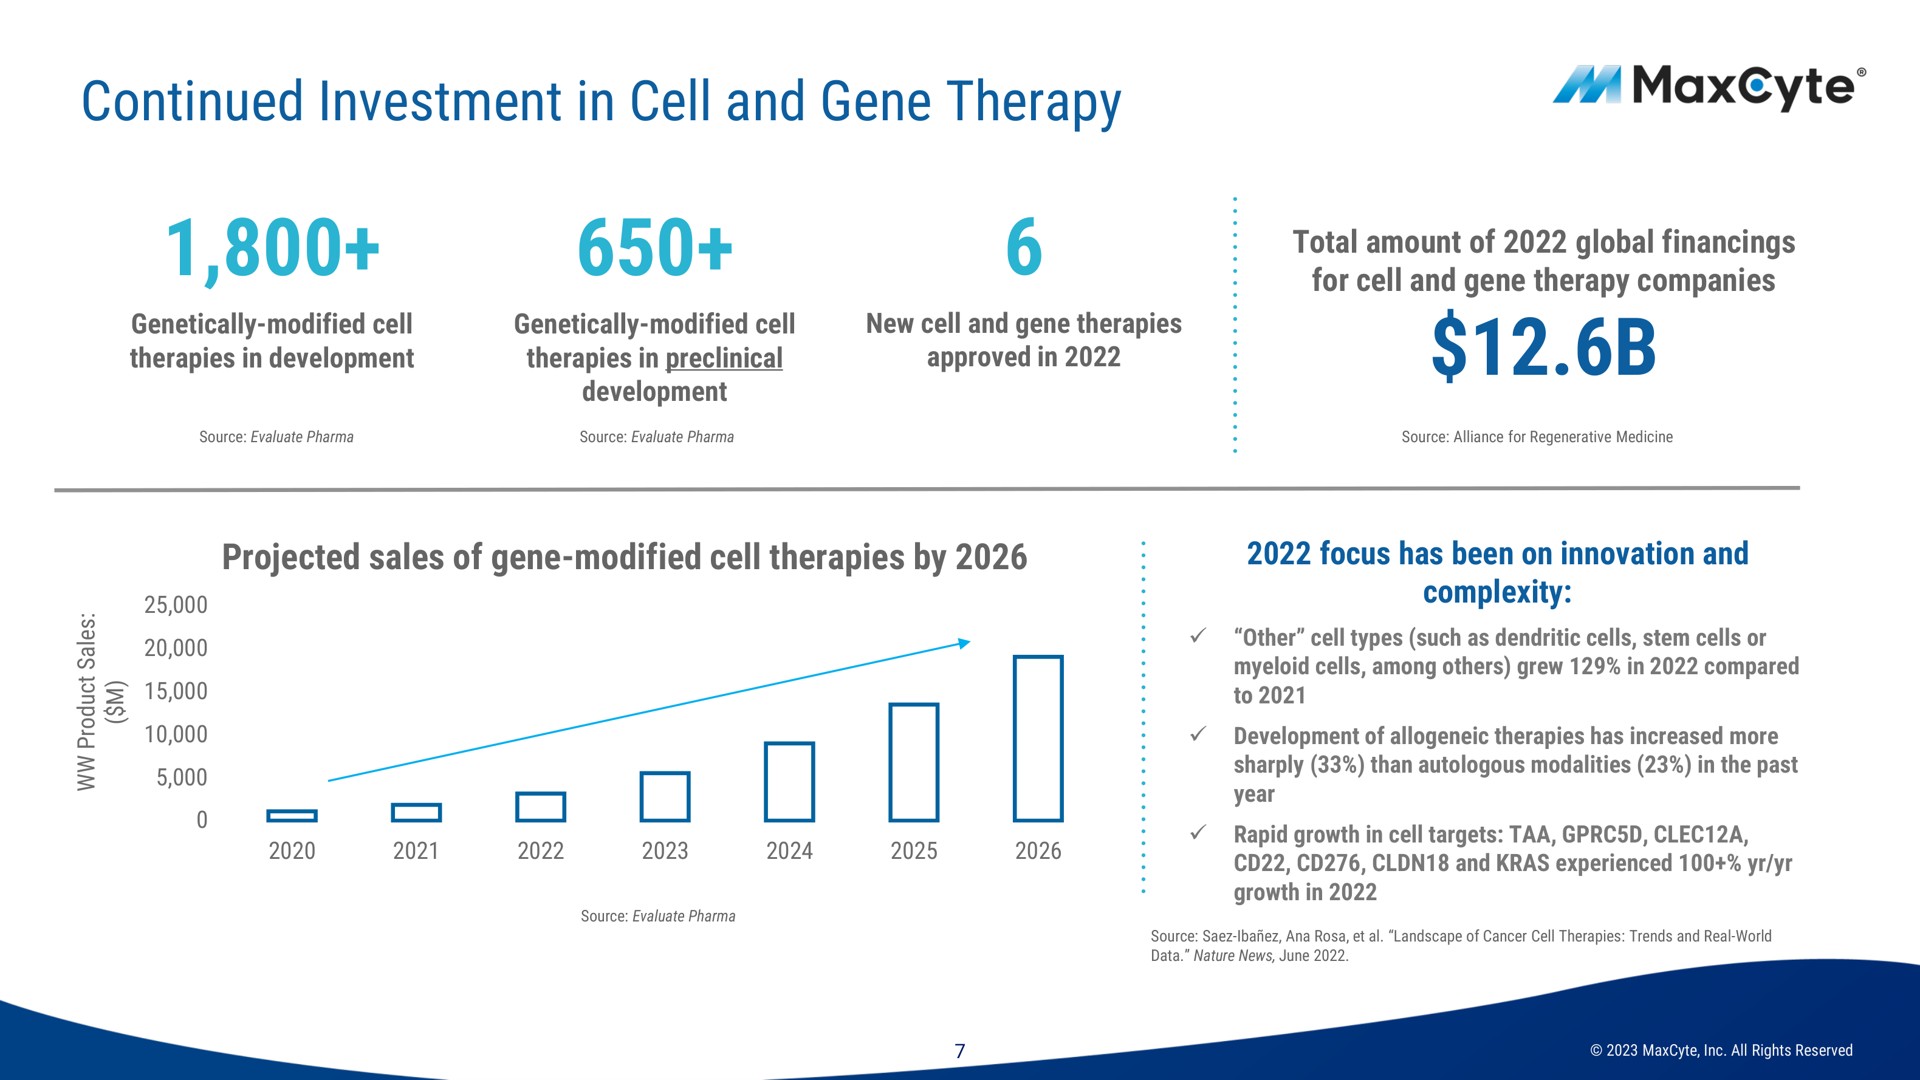 continued investment in cell and gene therapy i total amount of global financings | MaxCyte